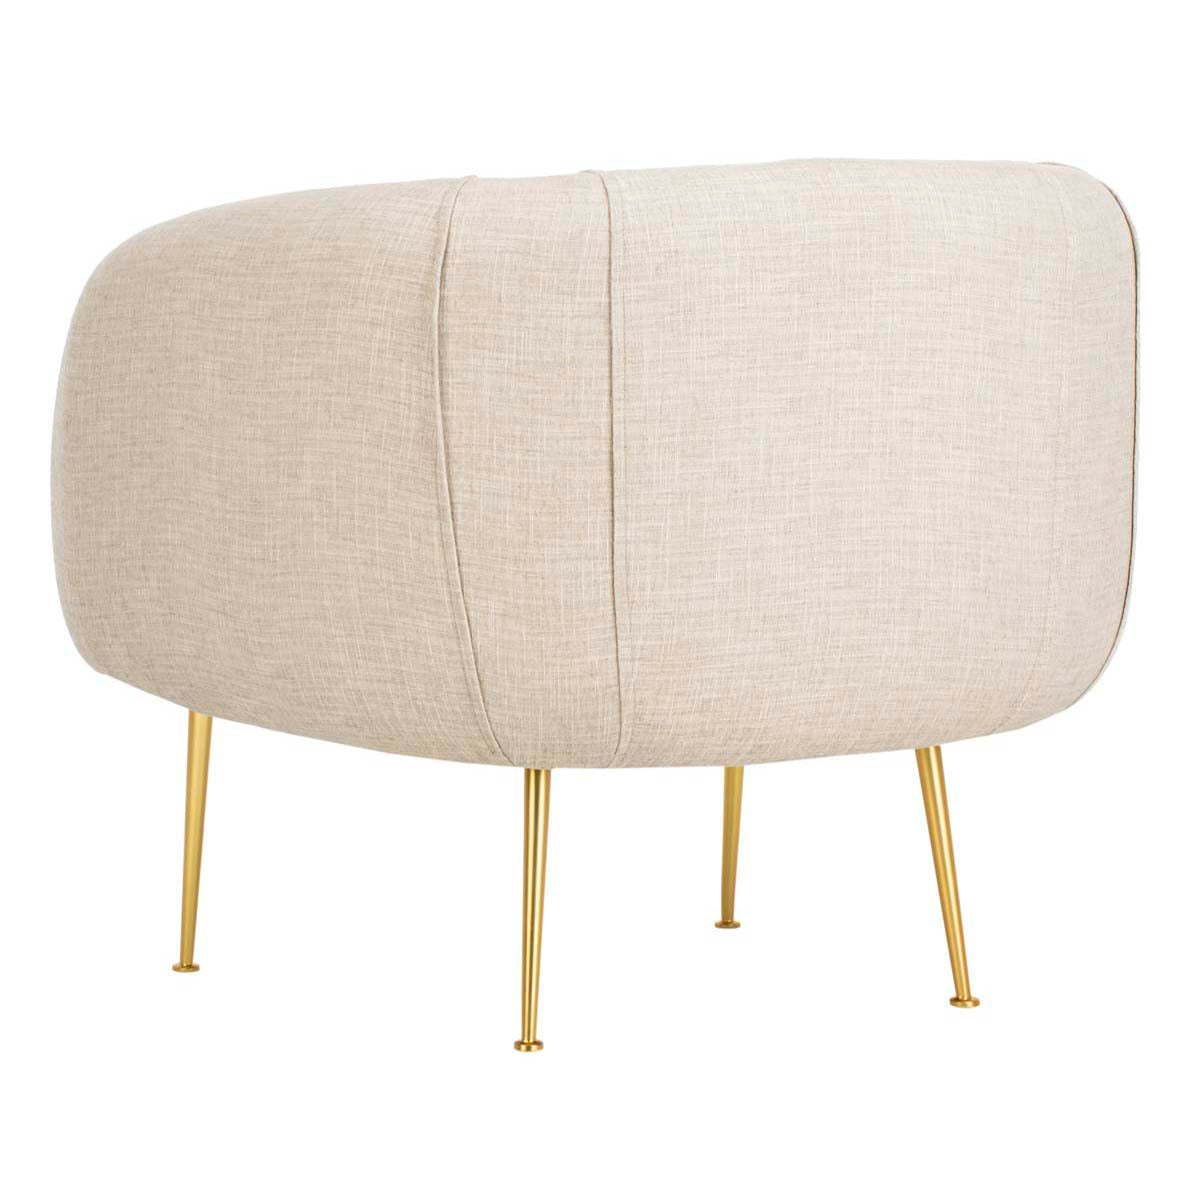 Safavieh Couture Alena Accent Chair - Oatmeal